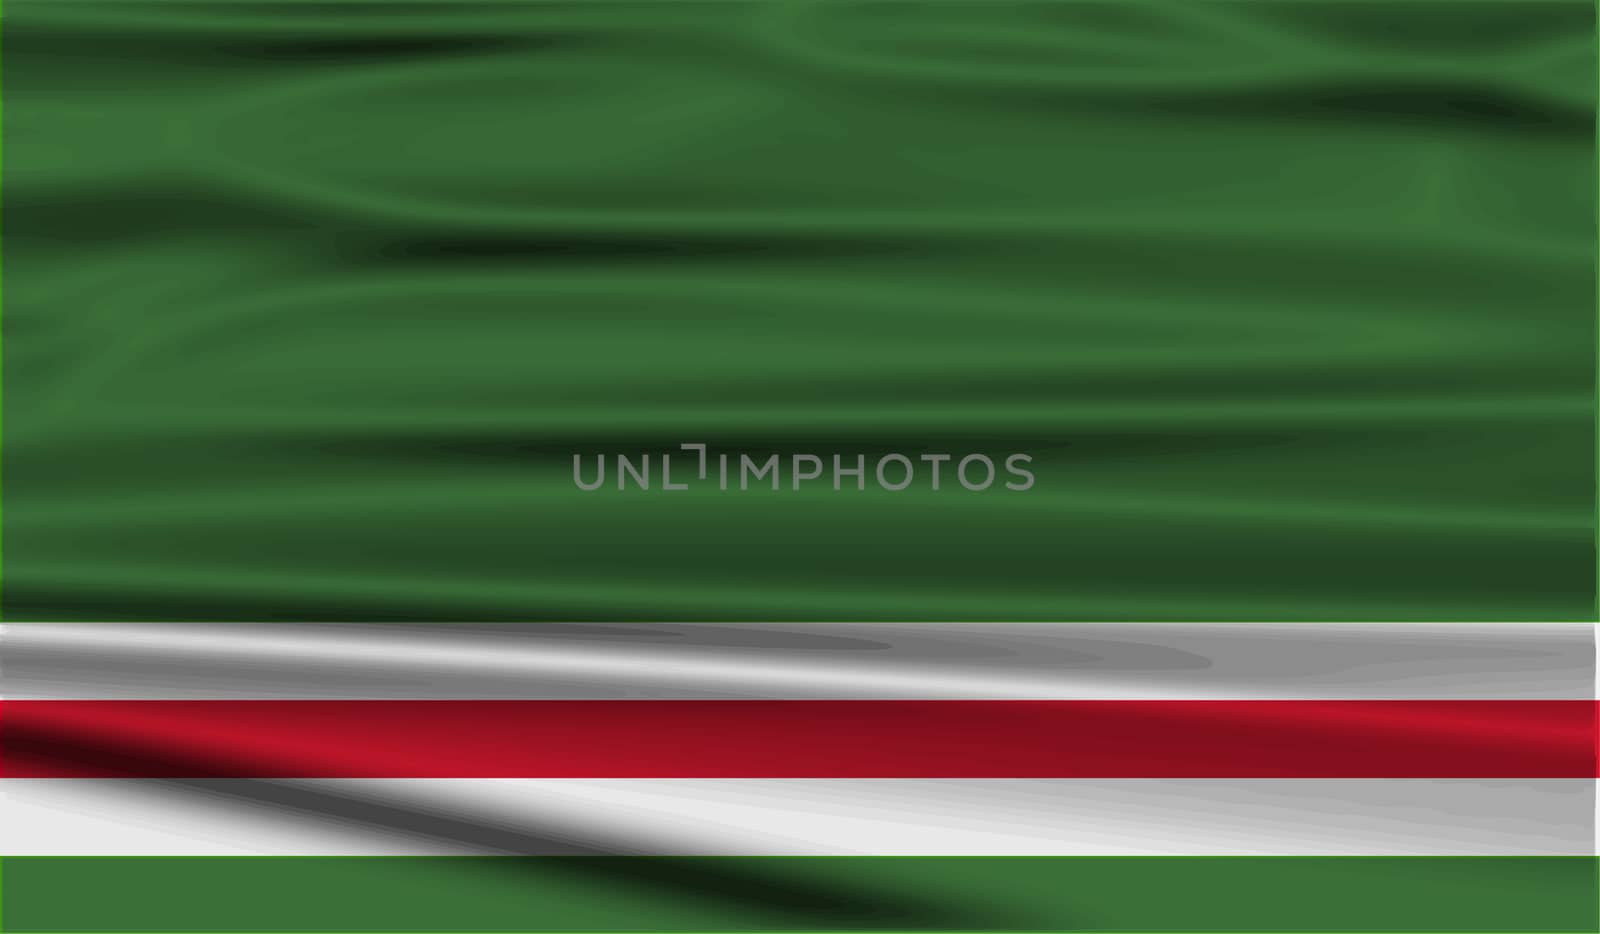 Flag of Chechen Republic of Ichkeria with old texture.  illustration